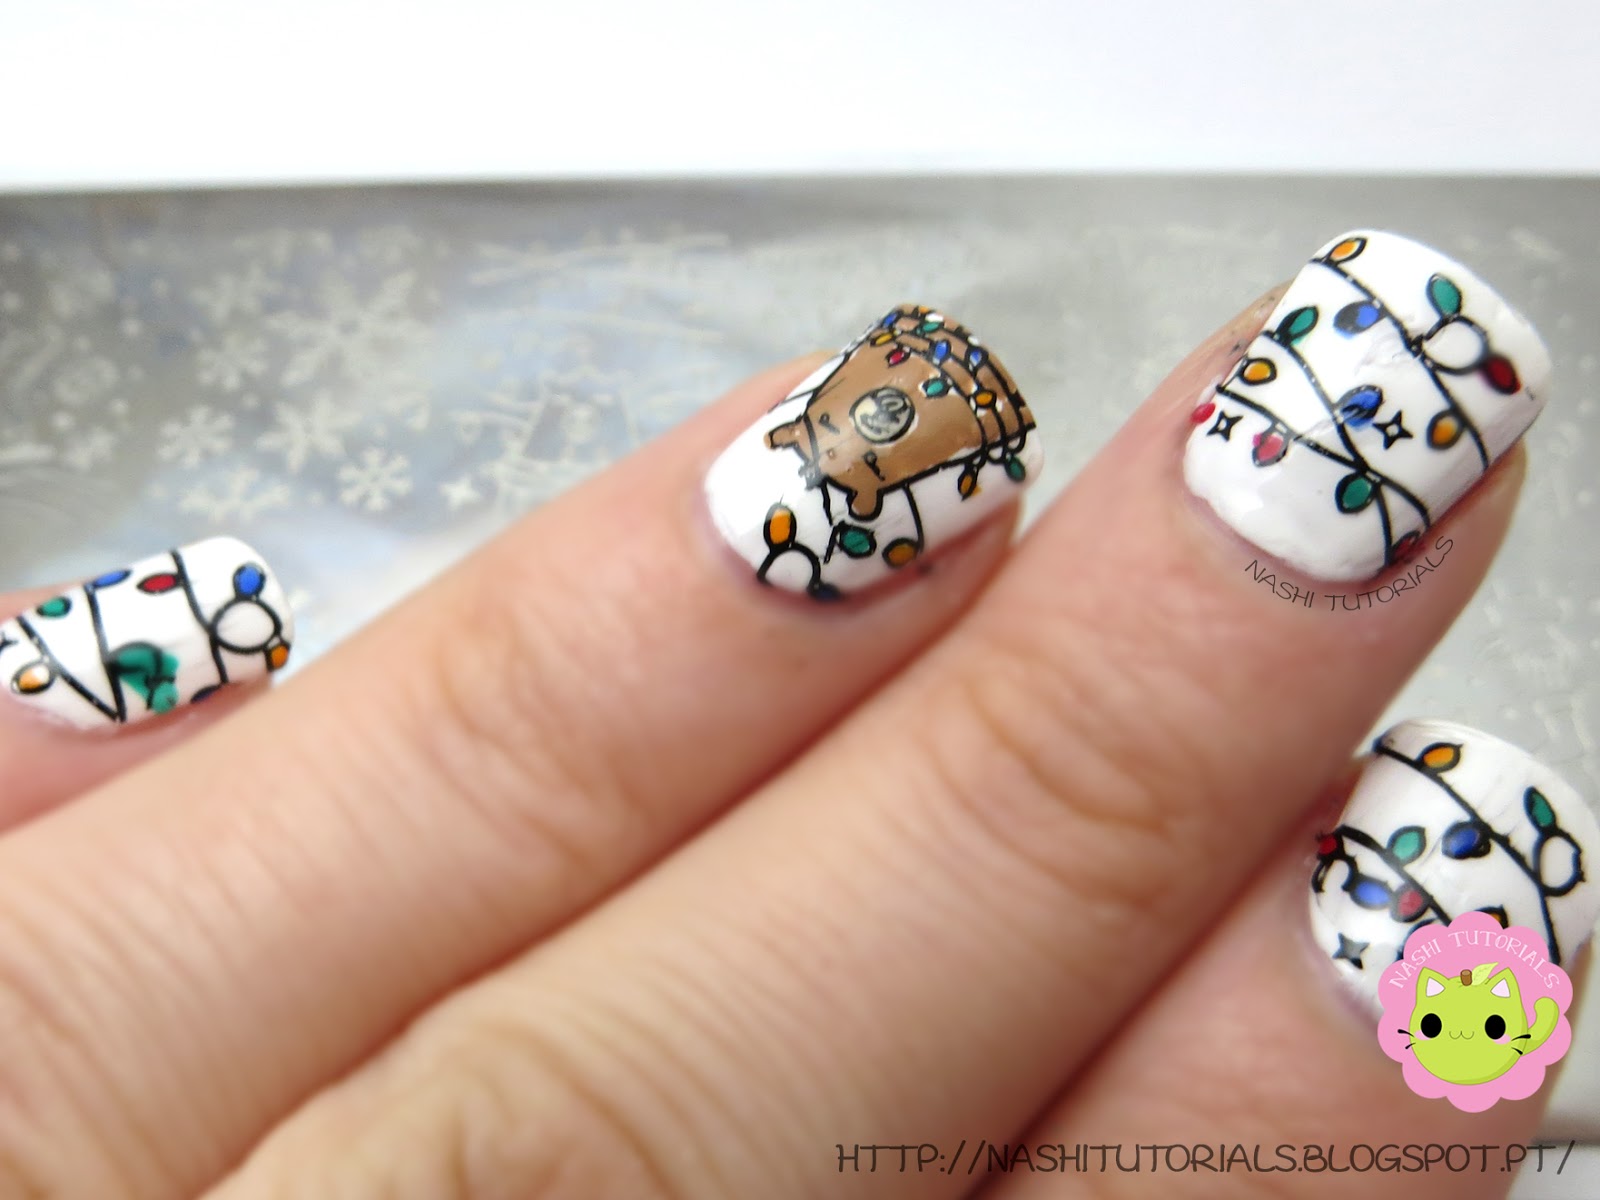 3. Stamping Nail Art Designs and Tutorials - wide 2